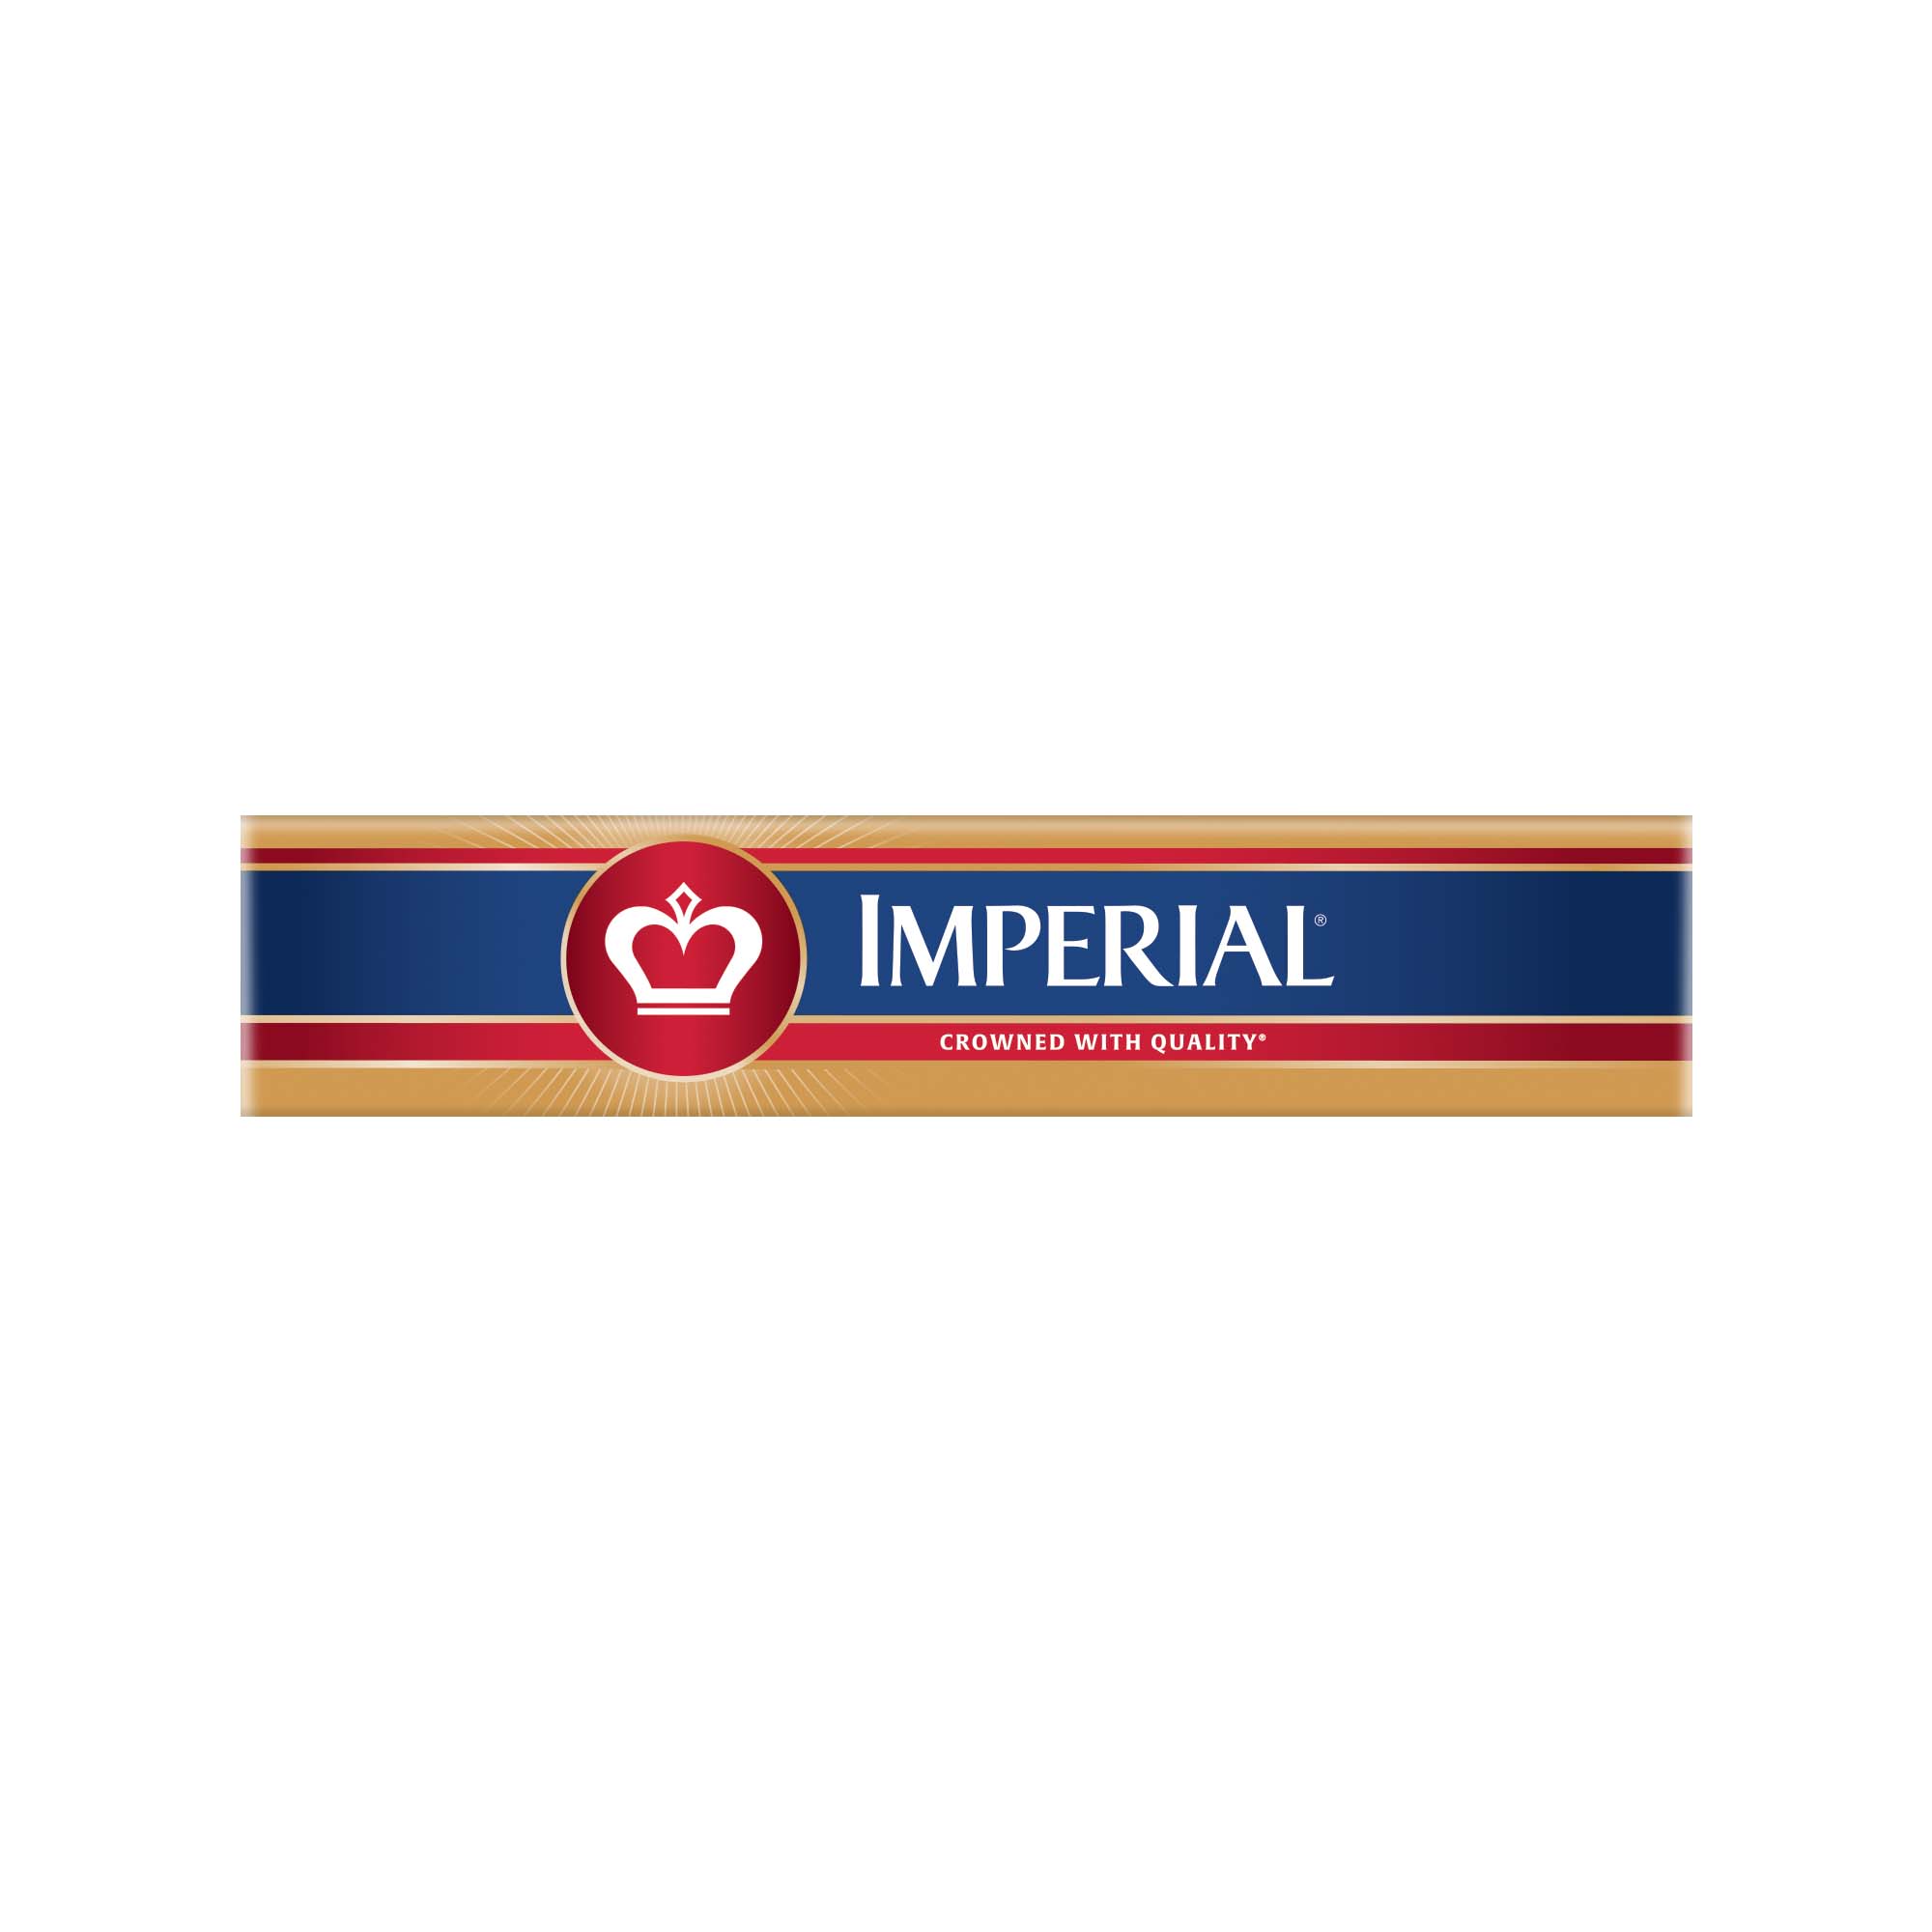 Imperial Vegetable Oil Spread, 16 oz Box, 4 Sticks (Refrigerated) - image 4 of 7